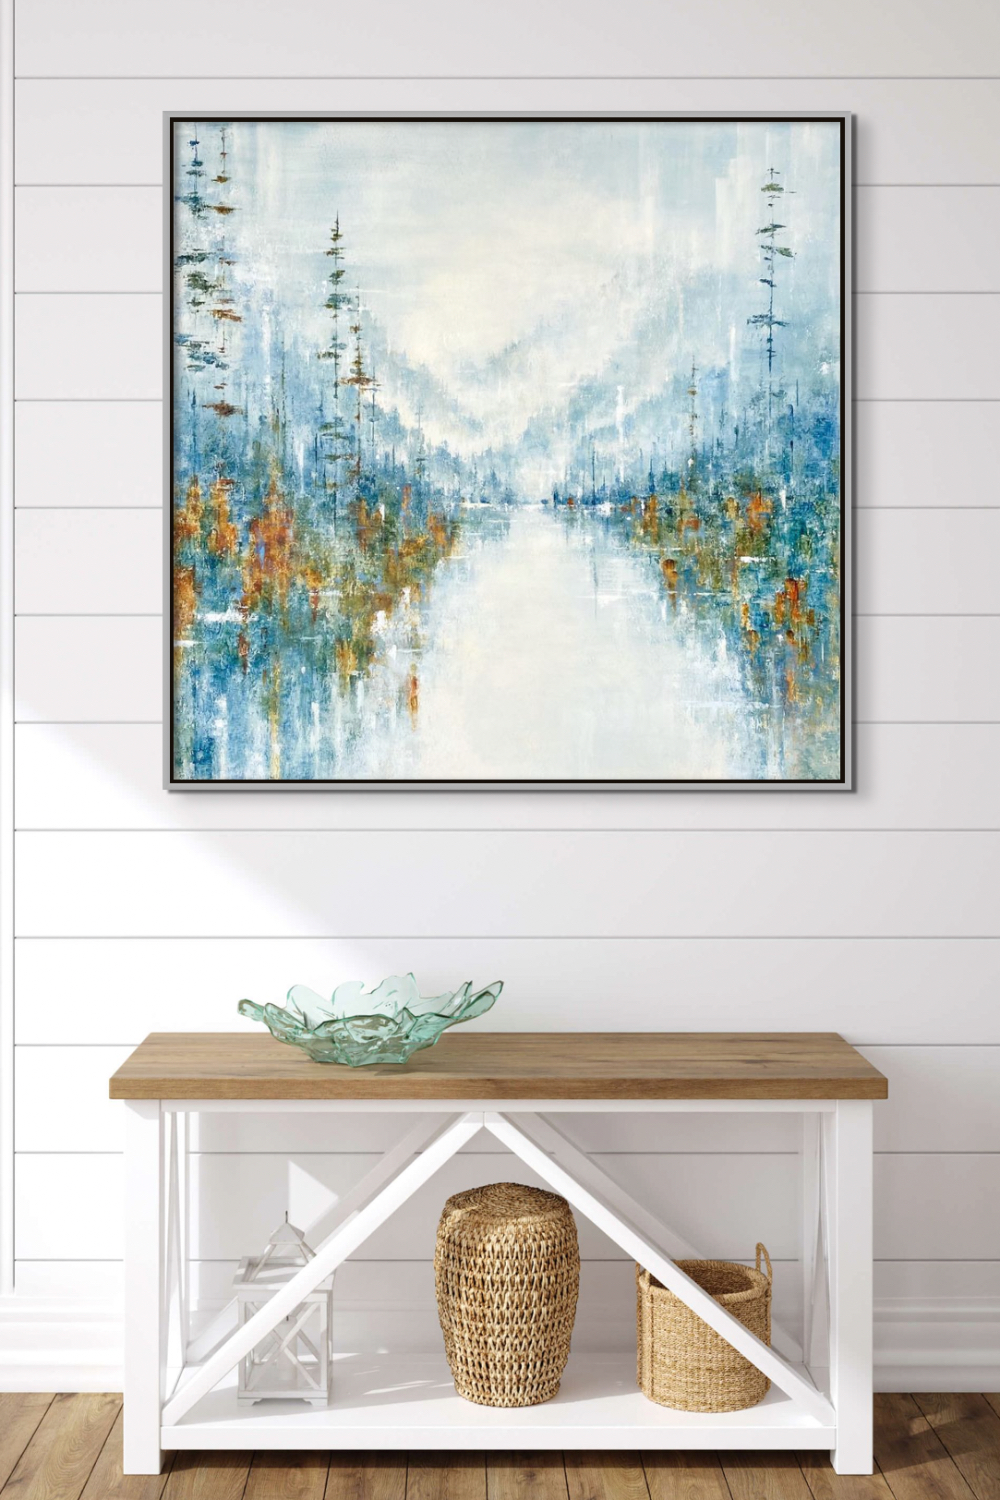 Soft abstract mountain lake landscape painting by Gina Sarro on a white shiplap wall over a small white and wood cabinet.